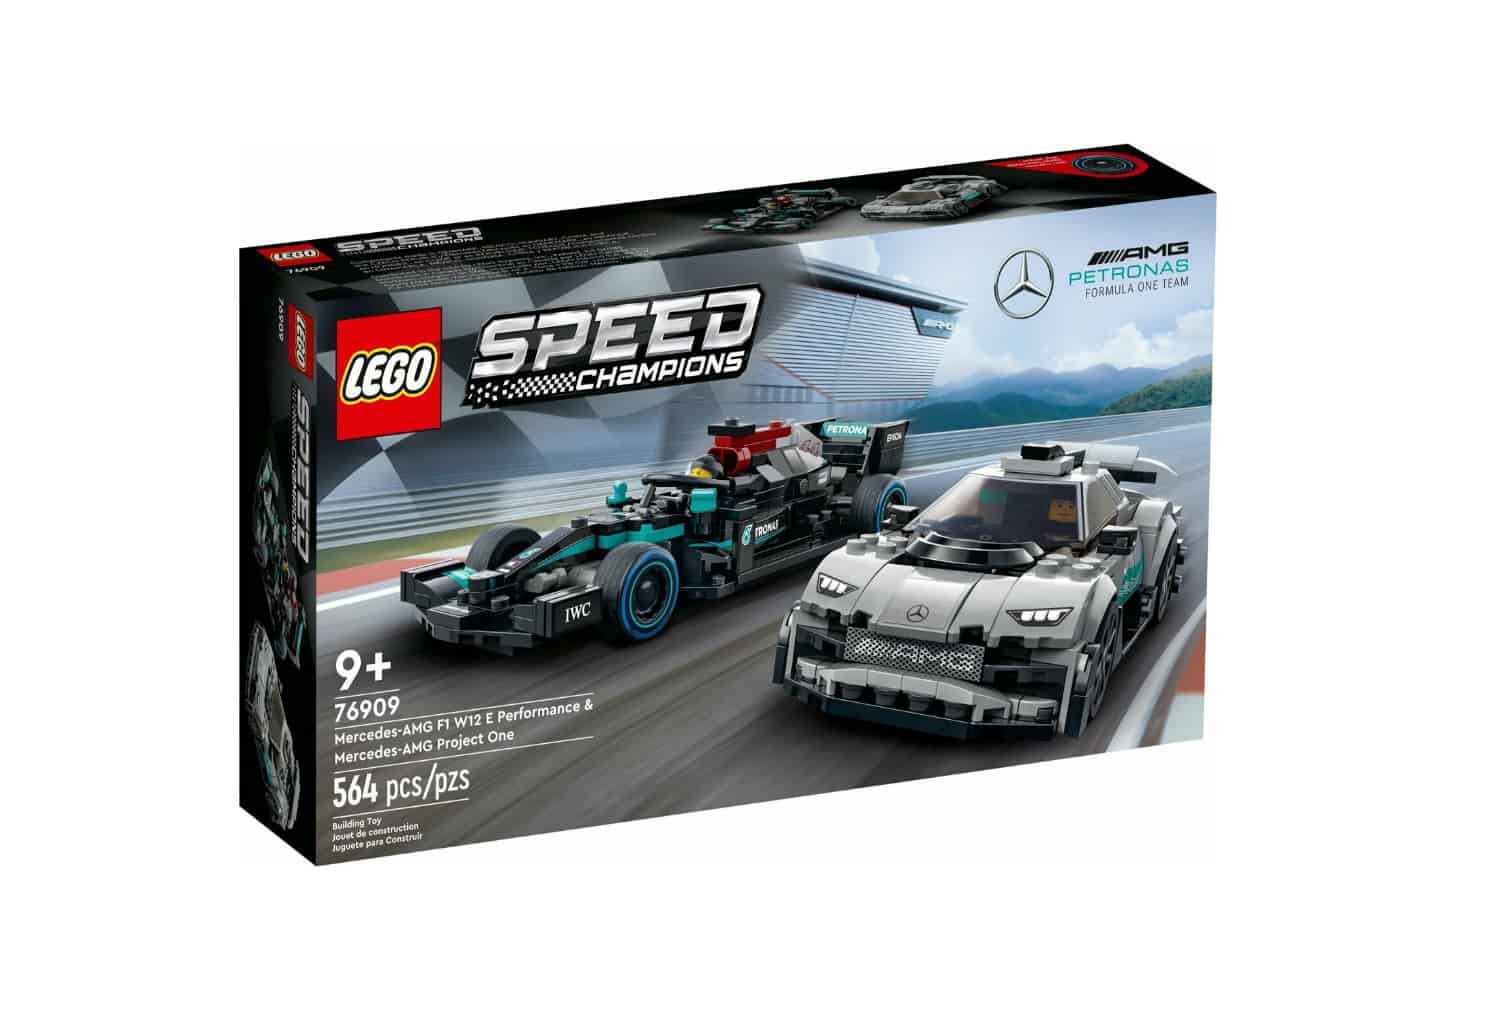 Lego Speed Champions - Mercedes - AMG F1 W12 E Performance & Mercedes - AMG Project One